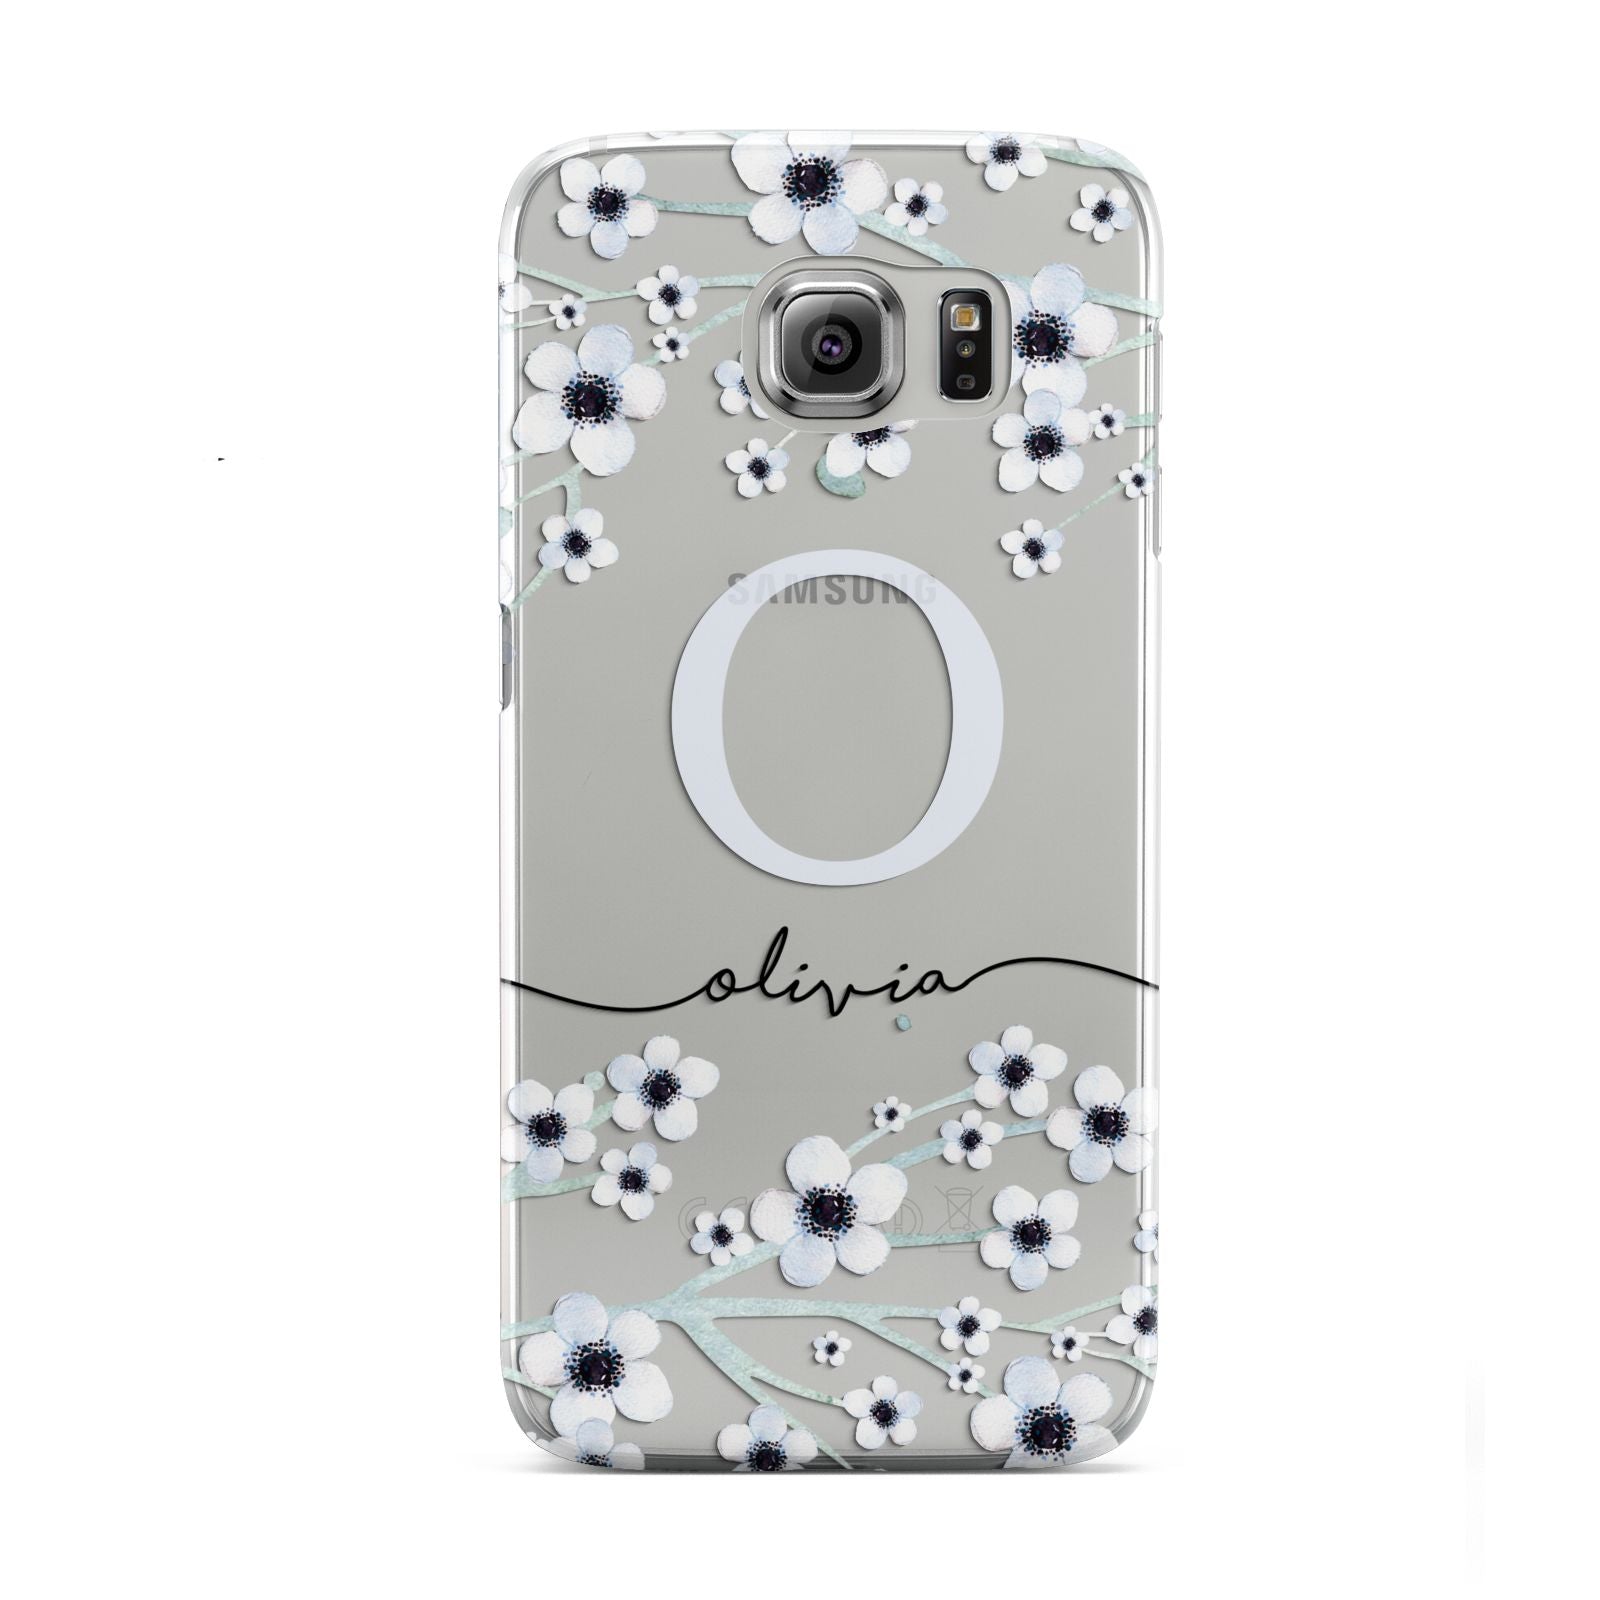 Personalised White Flower Samsung Galaxy S6 Case